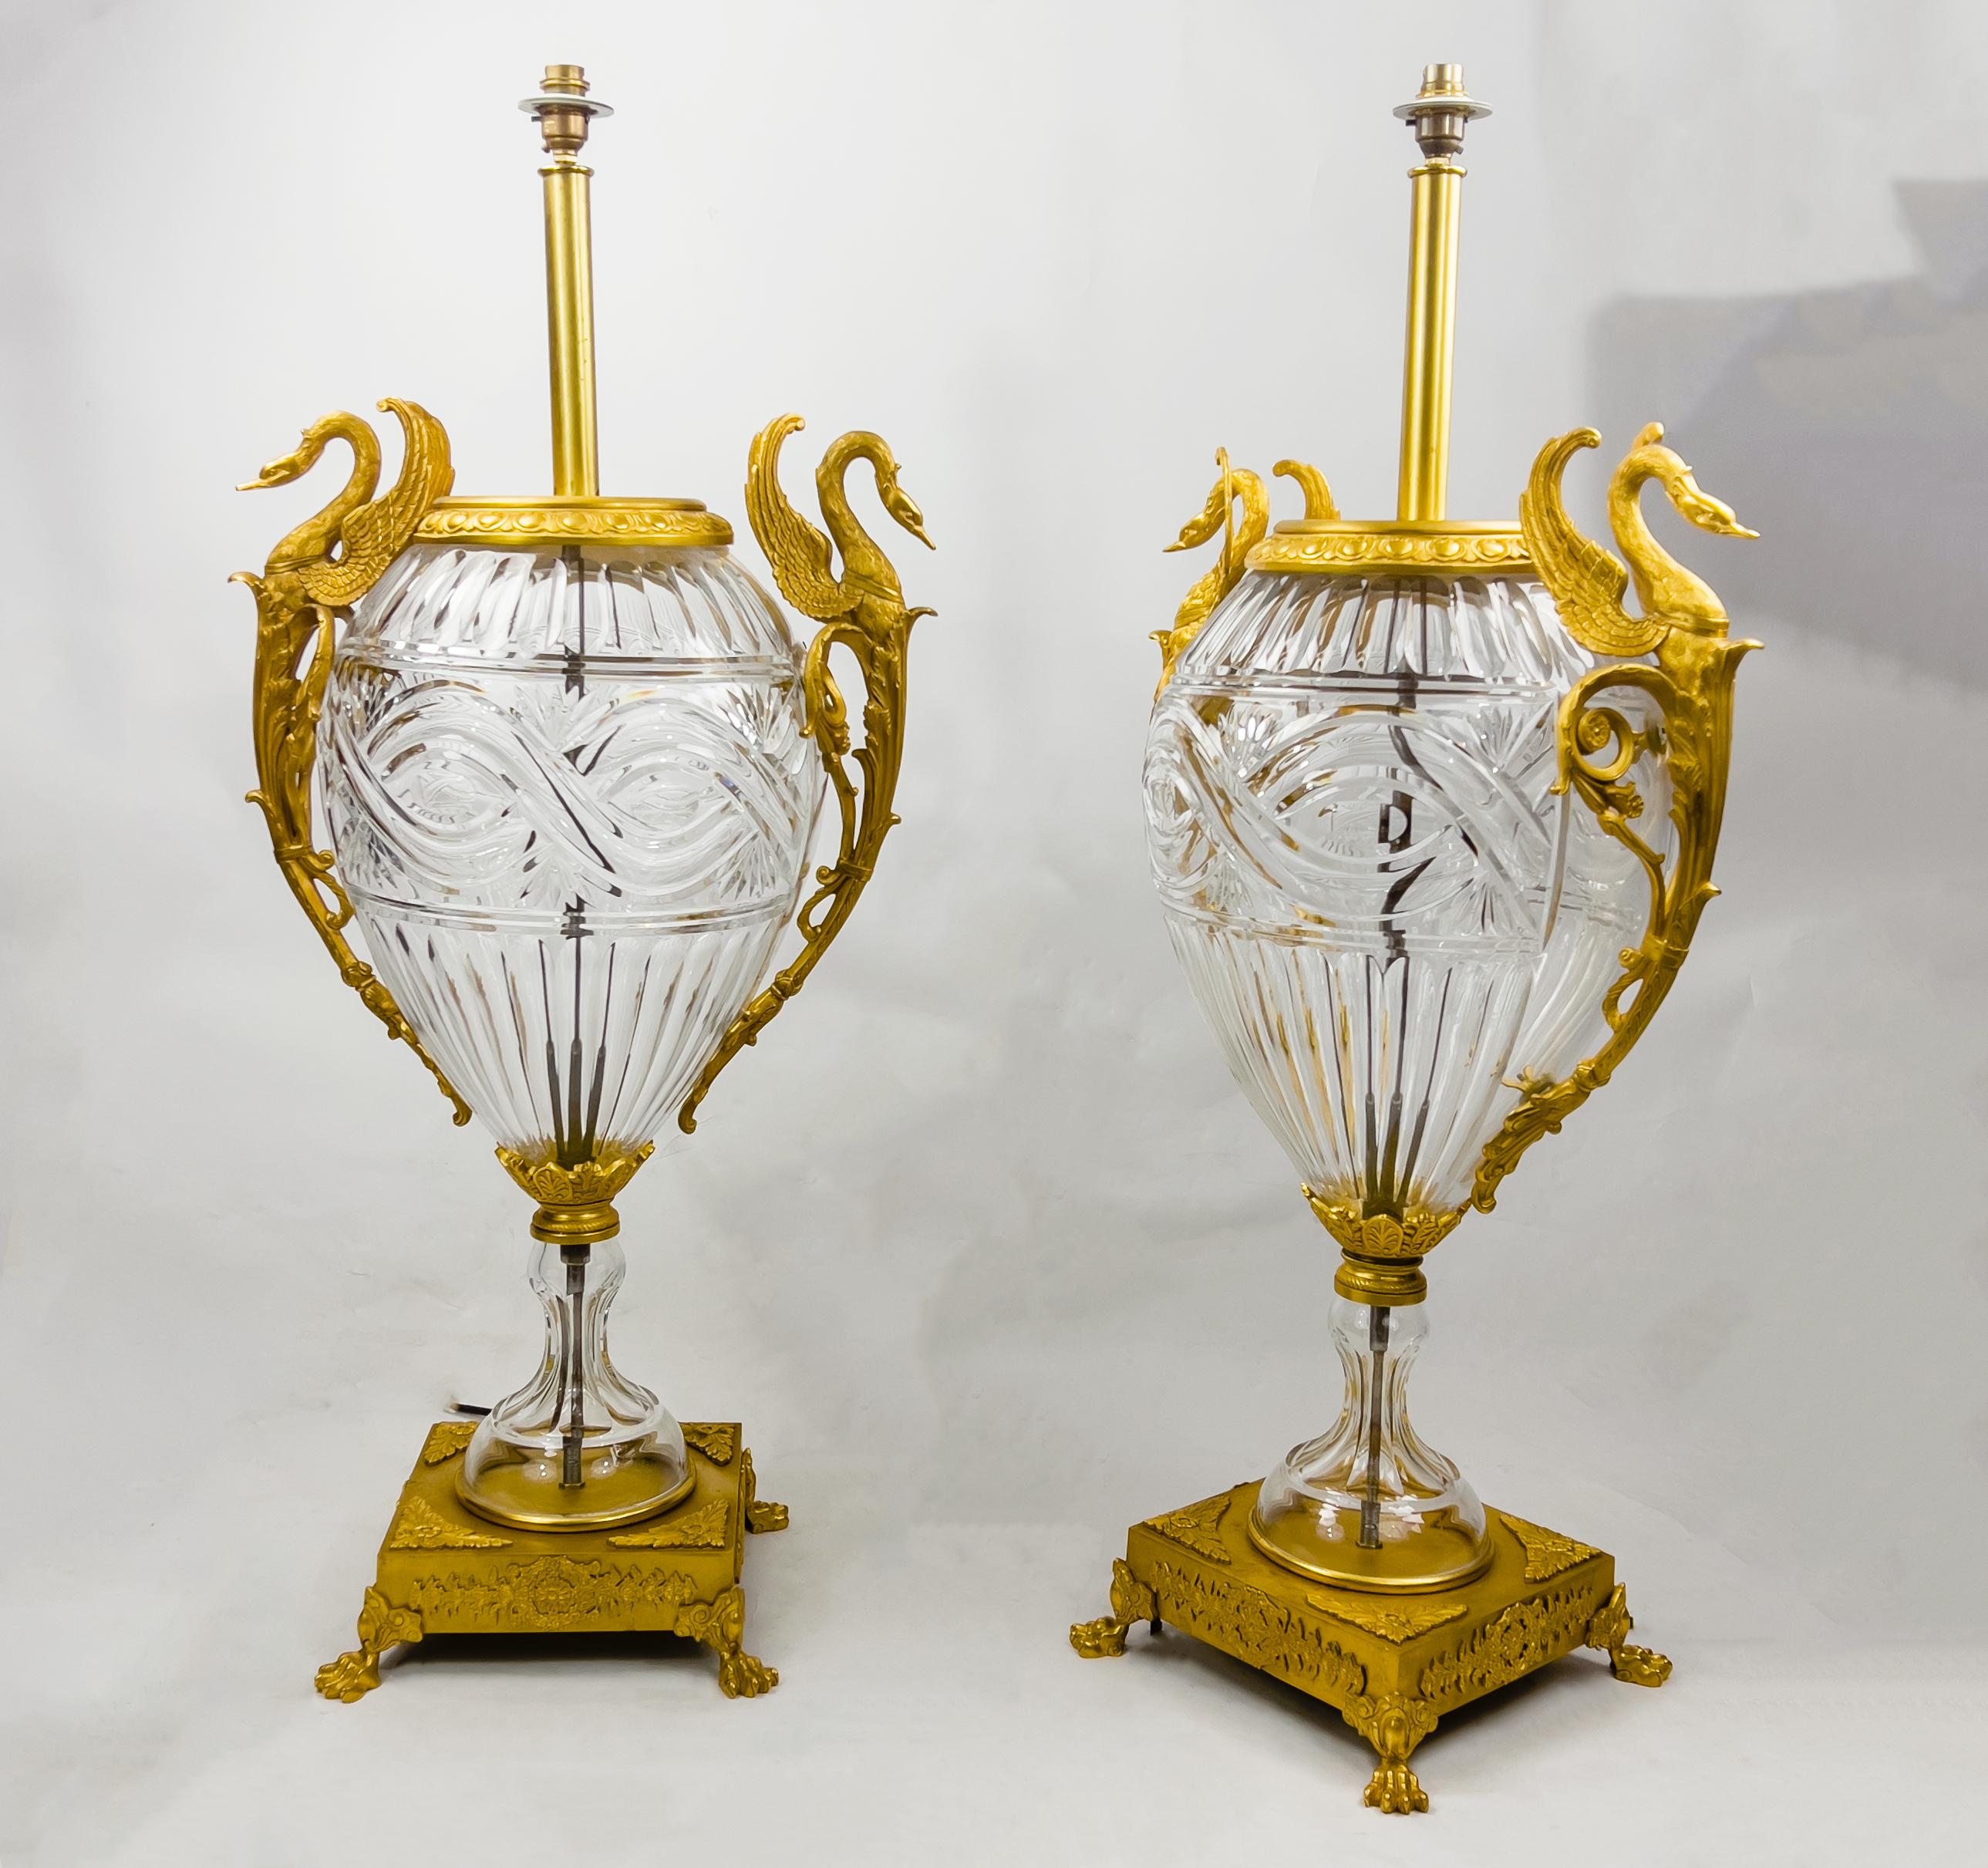 Neoclassical Large Pair of French Antique Ormolu-Mounted Cut-Glass Vases Fitted as Lamps